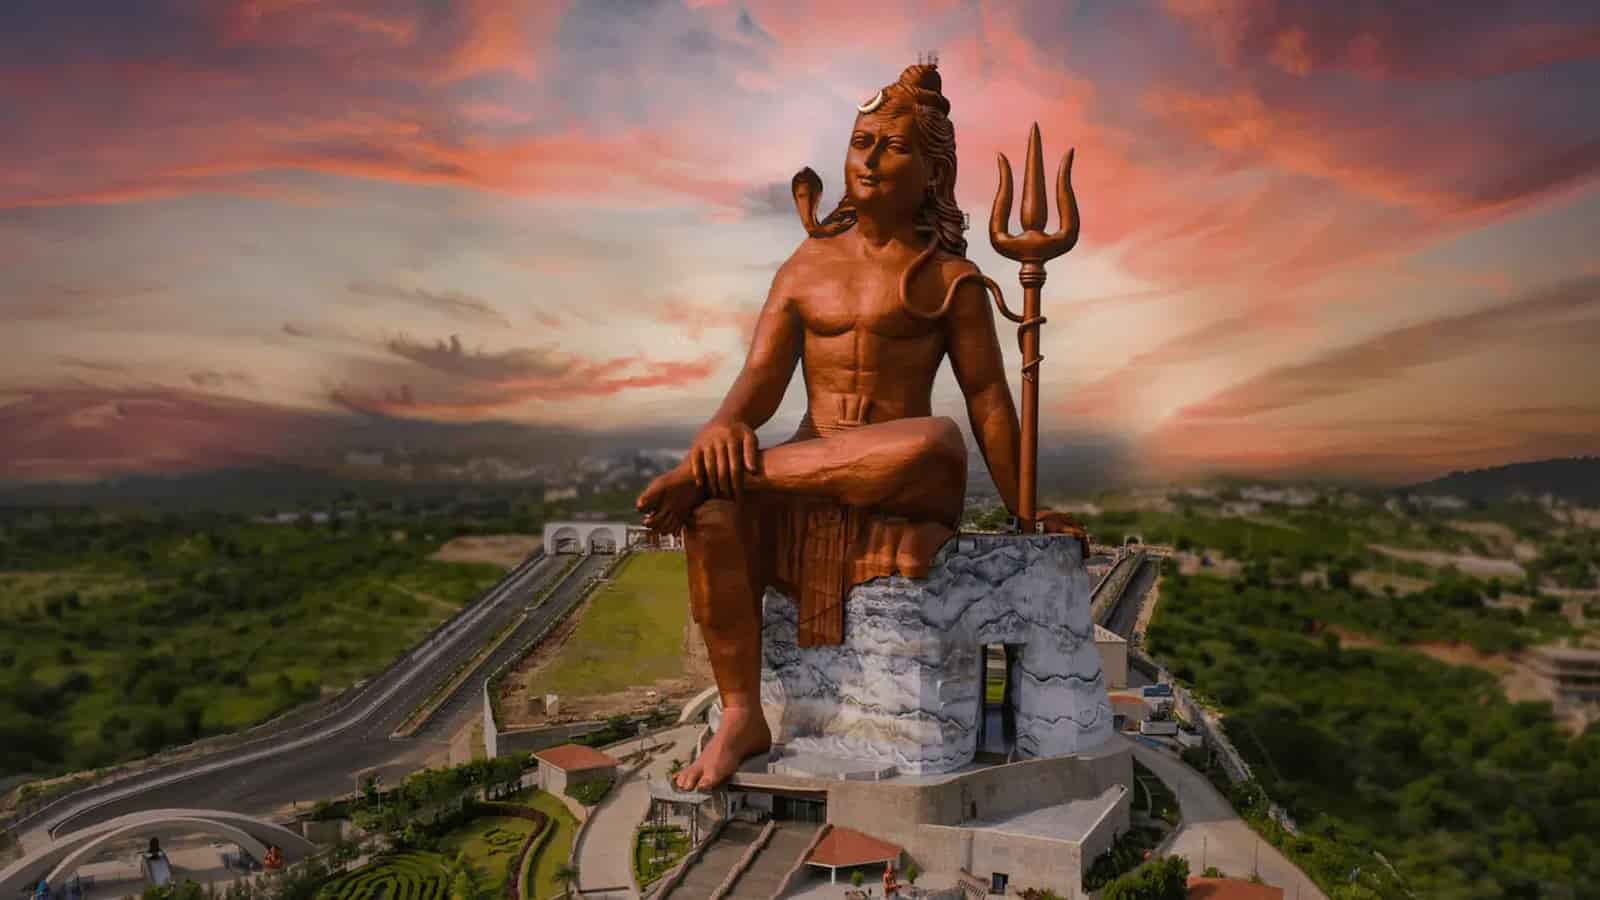 World's Tallest Lord Shiva Statue Statue of Belief